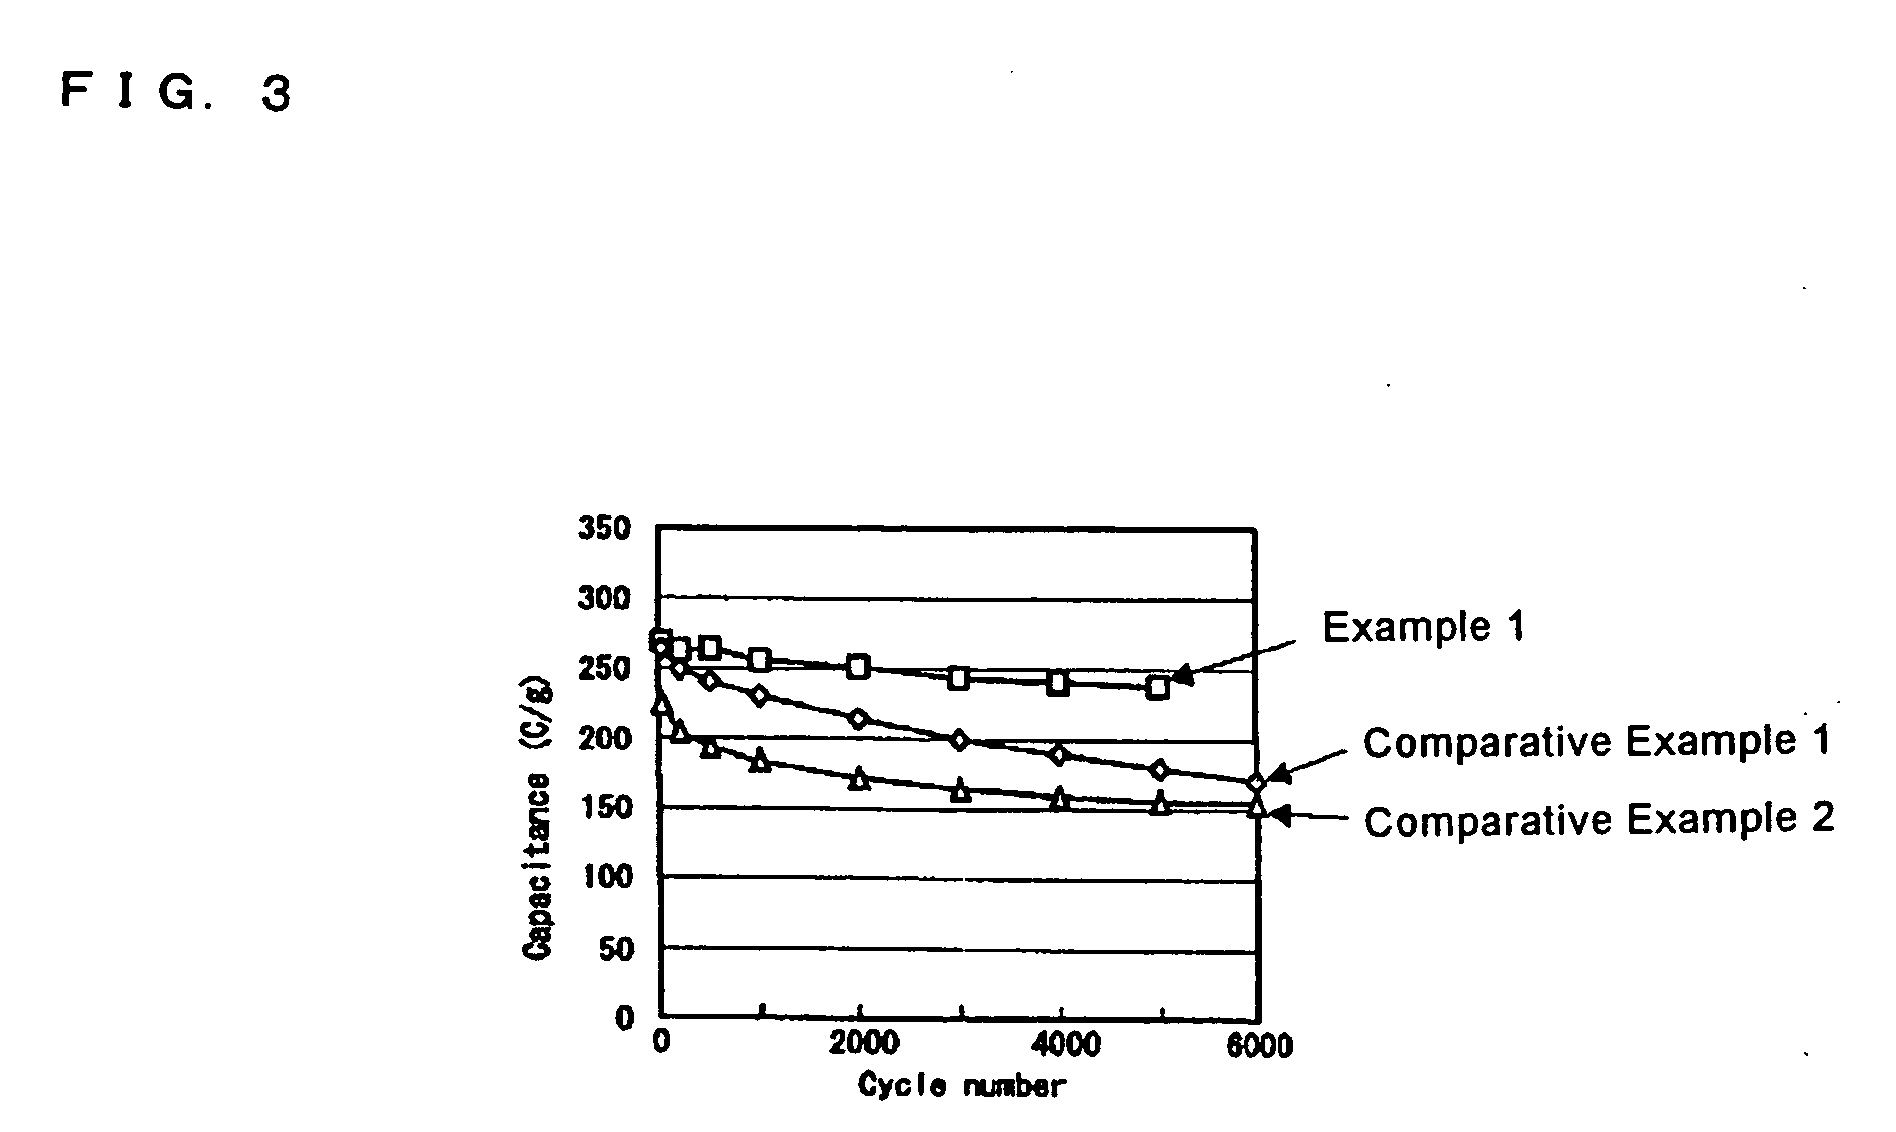 Polymers and electrochemical cell therewith